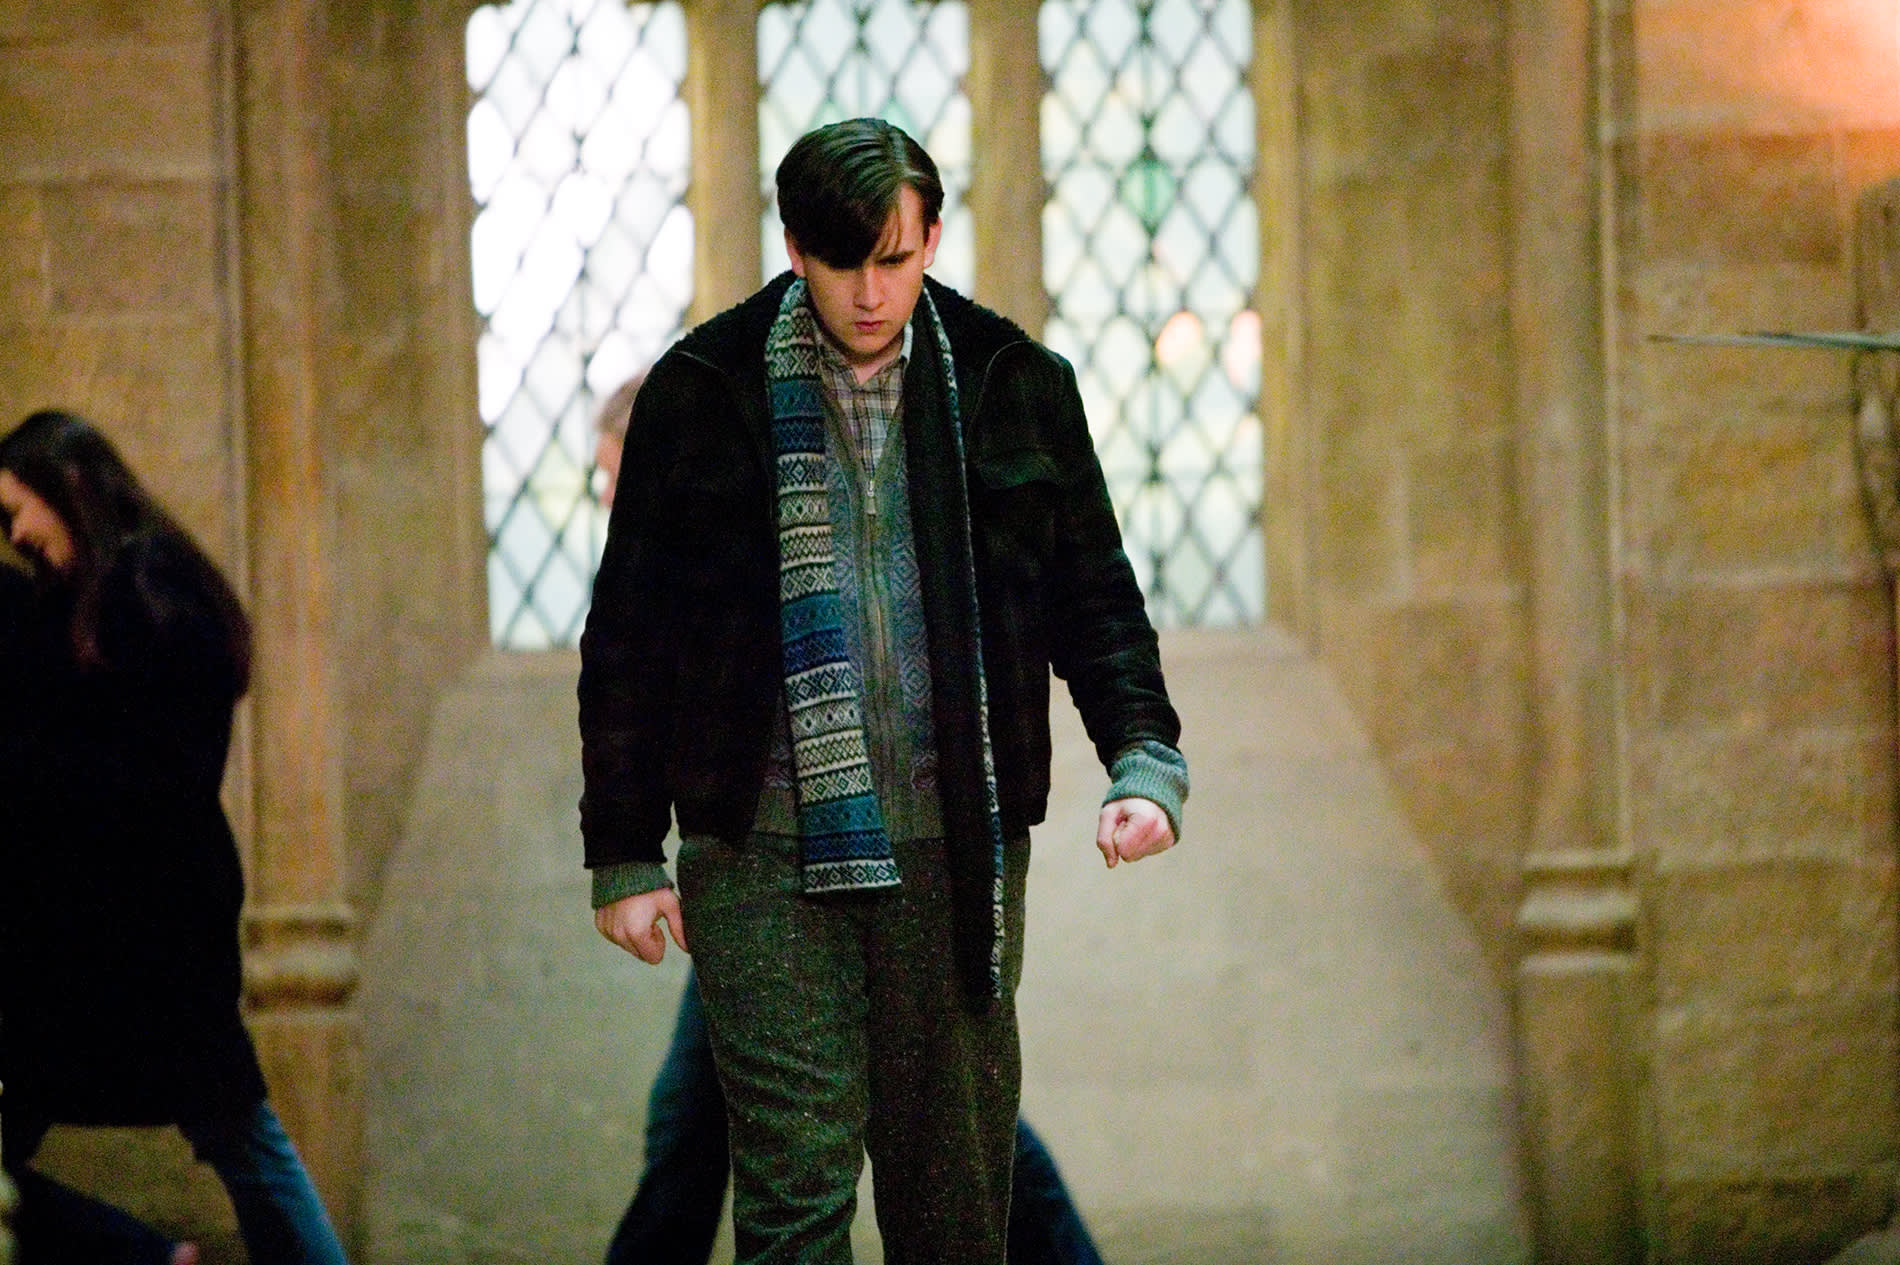 Neville Longbottom walking through Hogwarts wrapped up in a blue scarf.